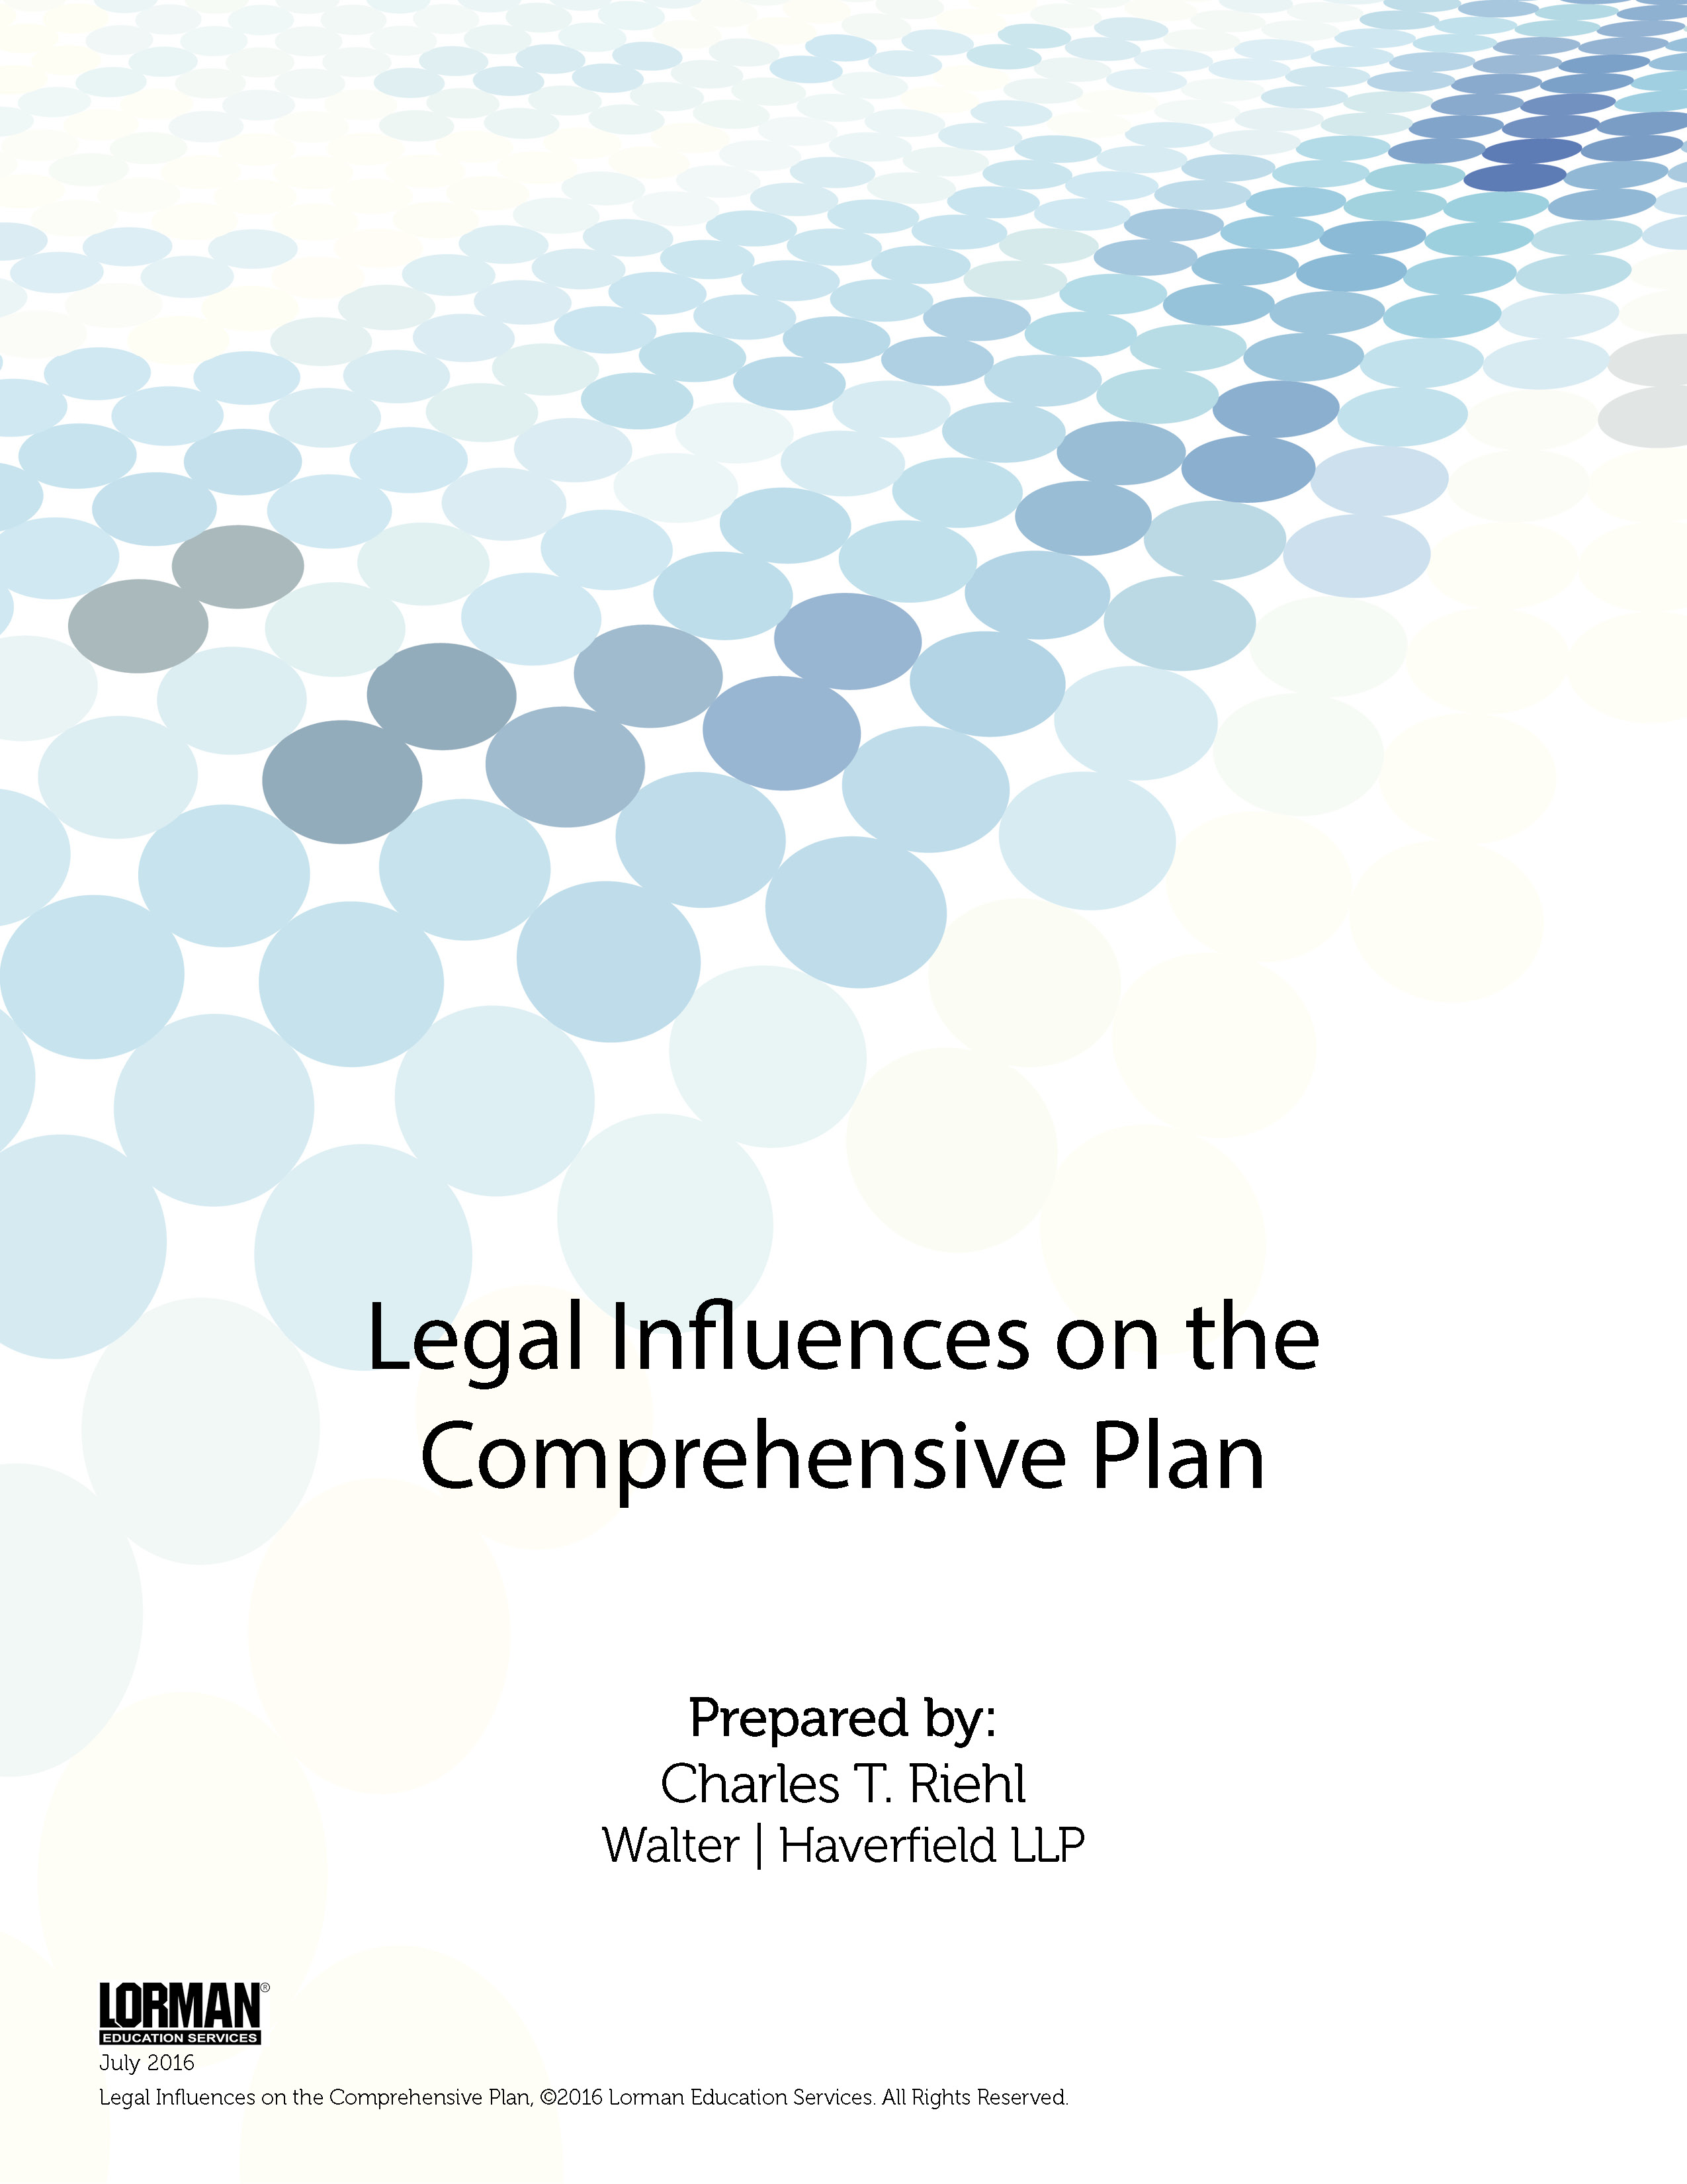 Legal Influences on the Comprehensive Plan in Ohio